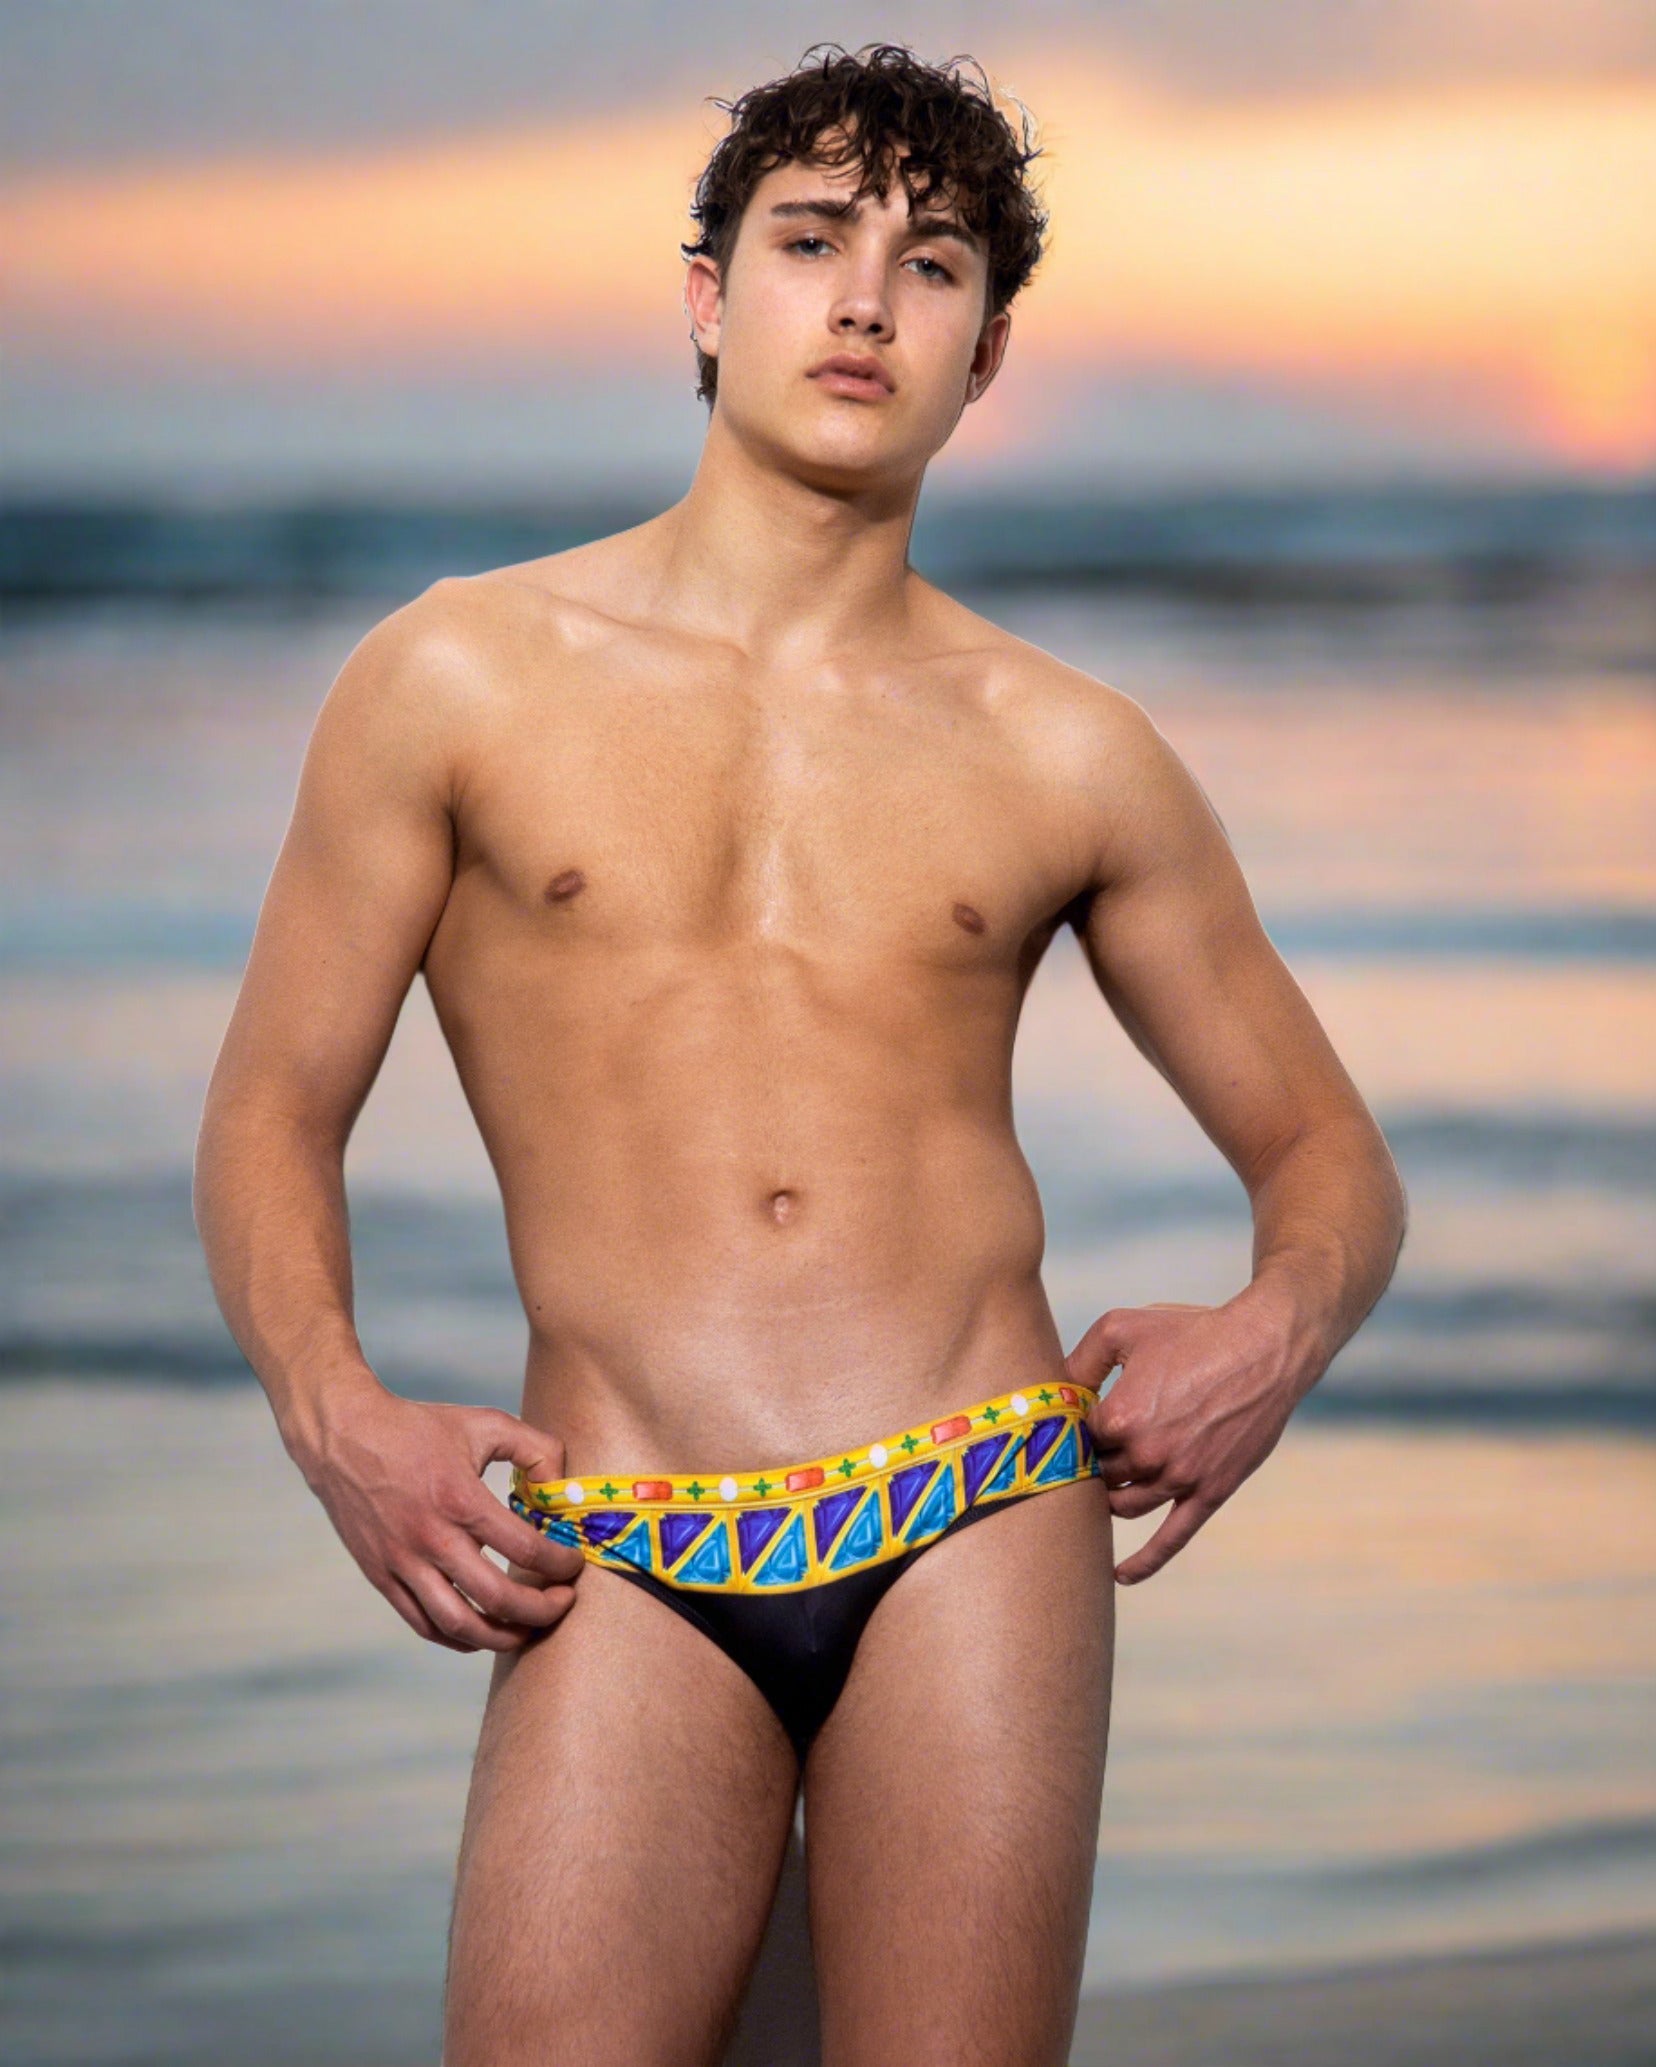 Our Bejeweled Swim Brief for Men. Speedo style cut.